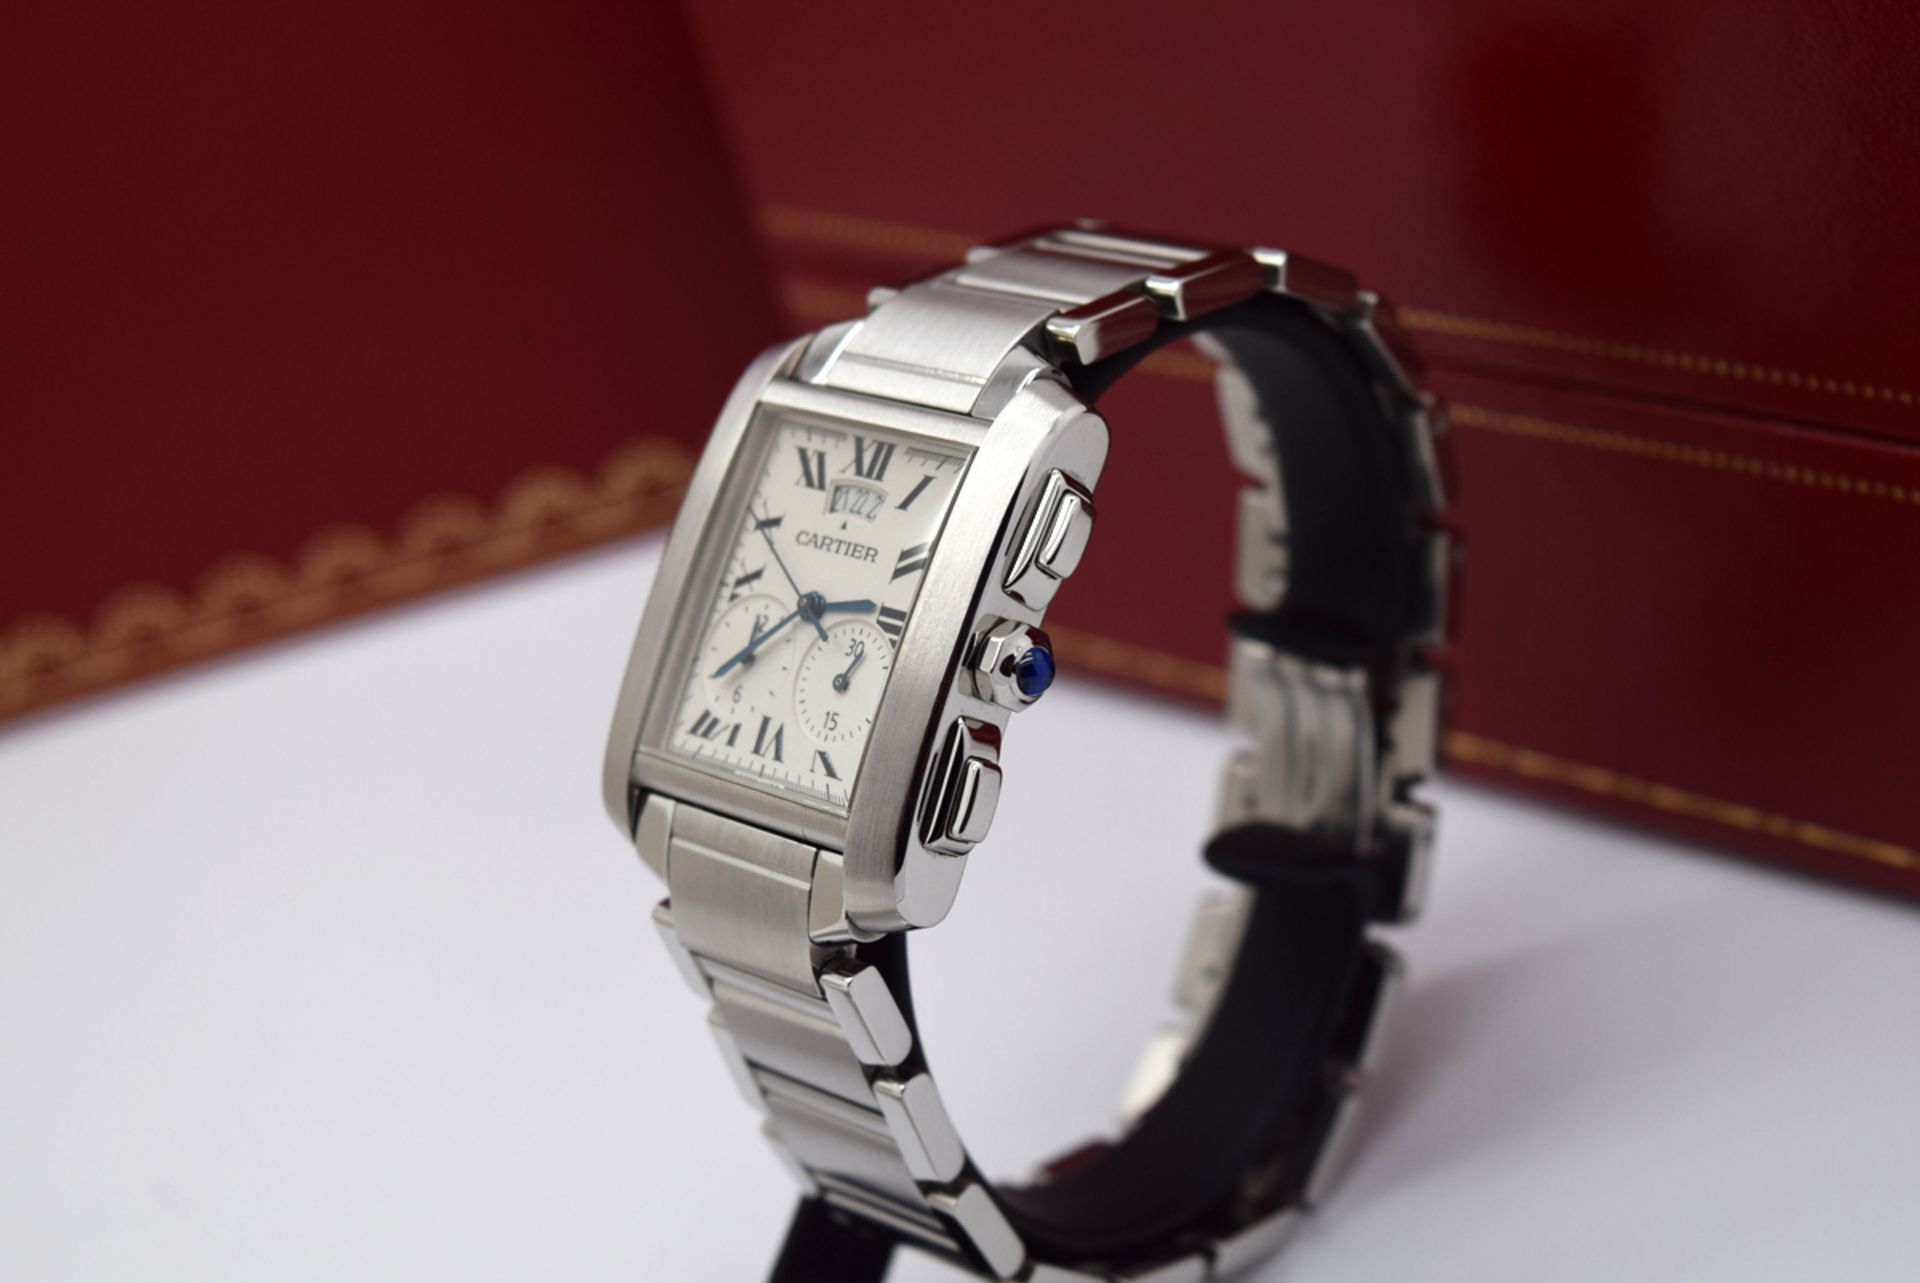 MENS CARTIER TANK CHRONOGRAPH - STAINLESS STEEL - BOX & PAPERS! - Image 7 of 12